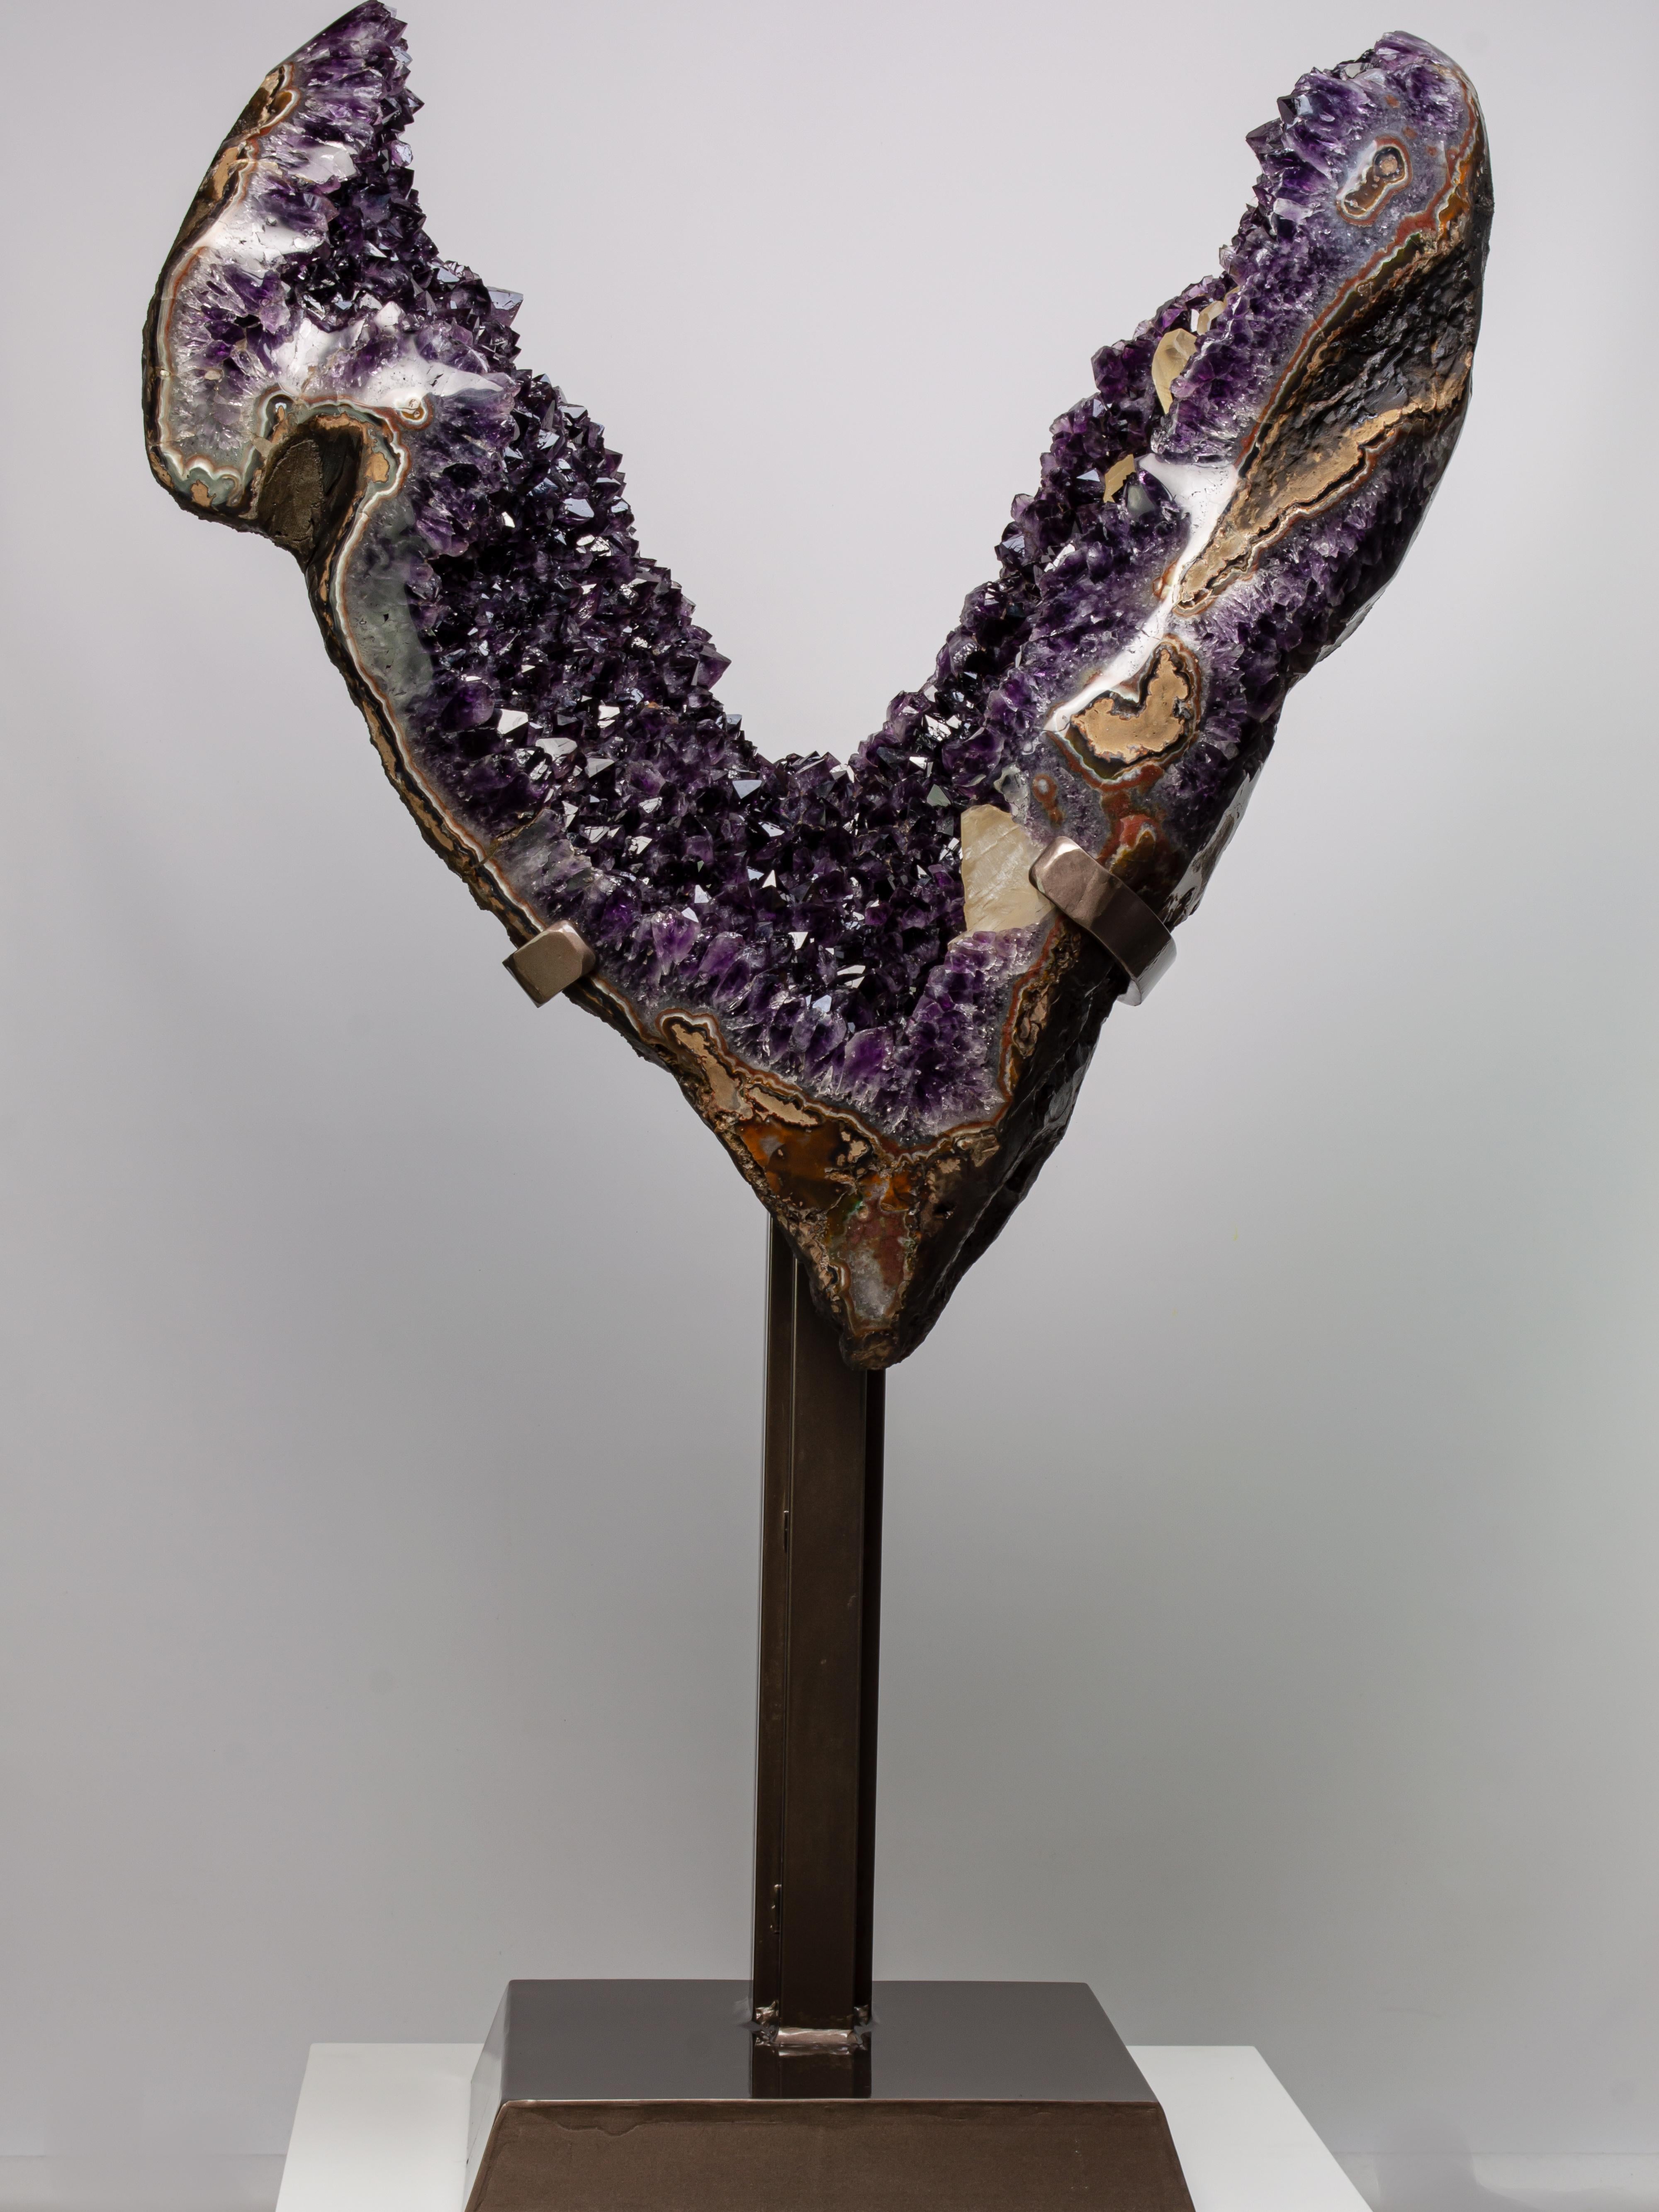 This very large and impressive formation preserves amethyst of very high peaks
and deep colour, punctuated by multiple cream coloured calcites. Playing beautifully in the light, the borders of this natural sculpture have been sympathetically